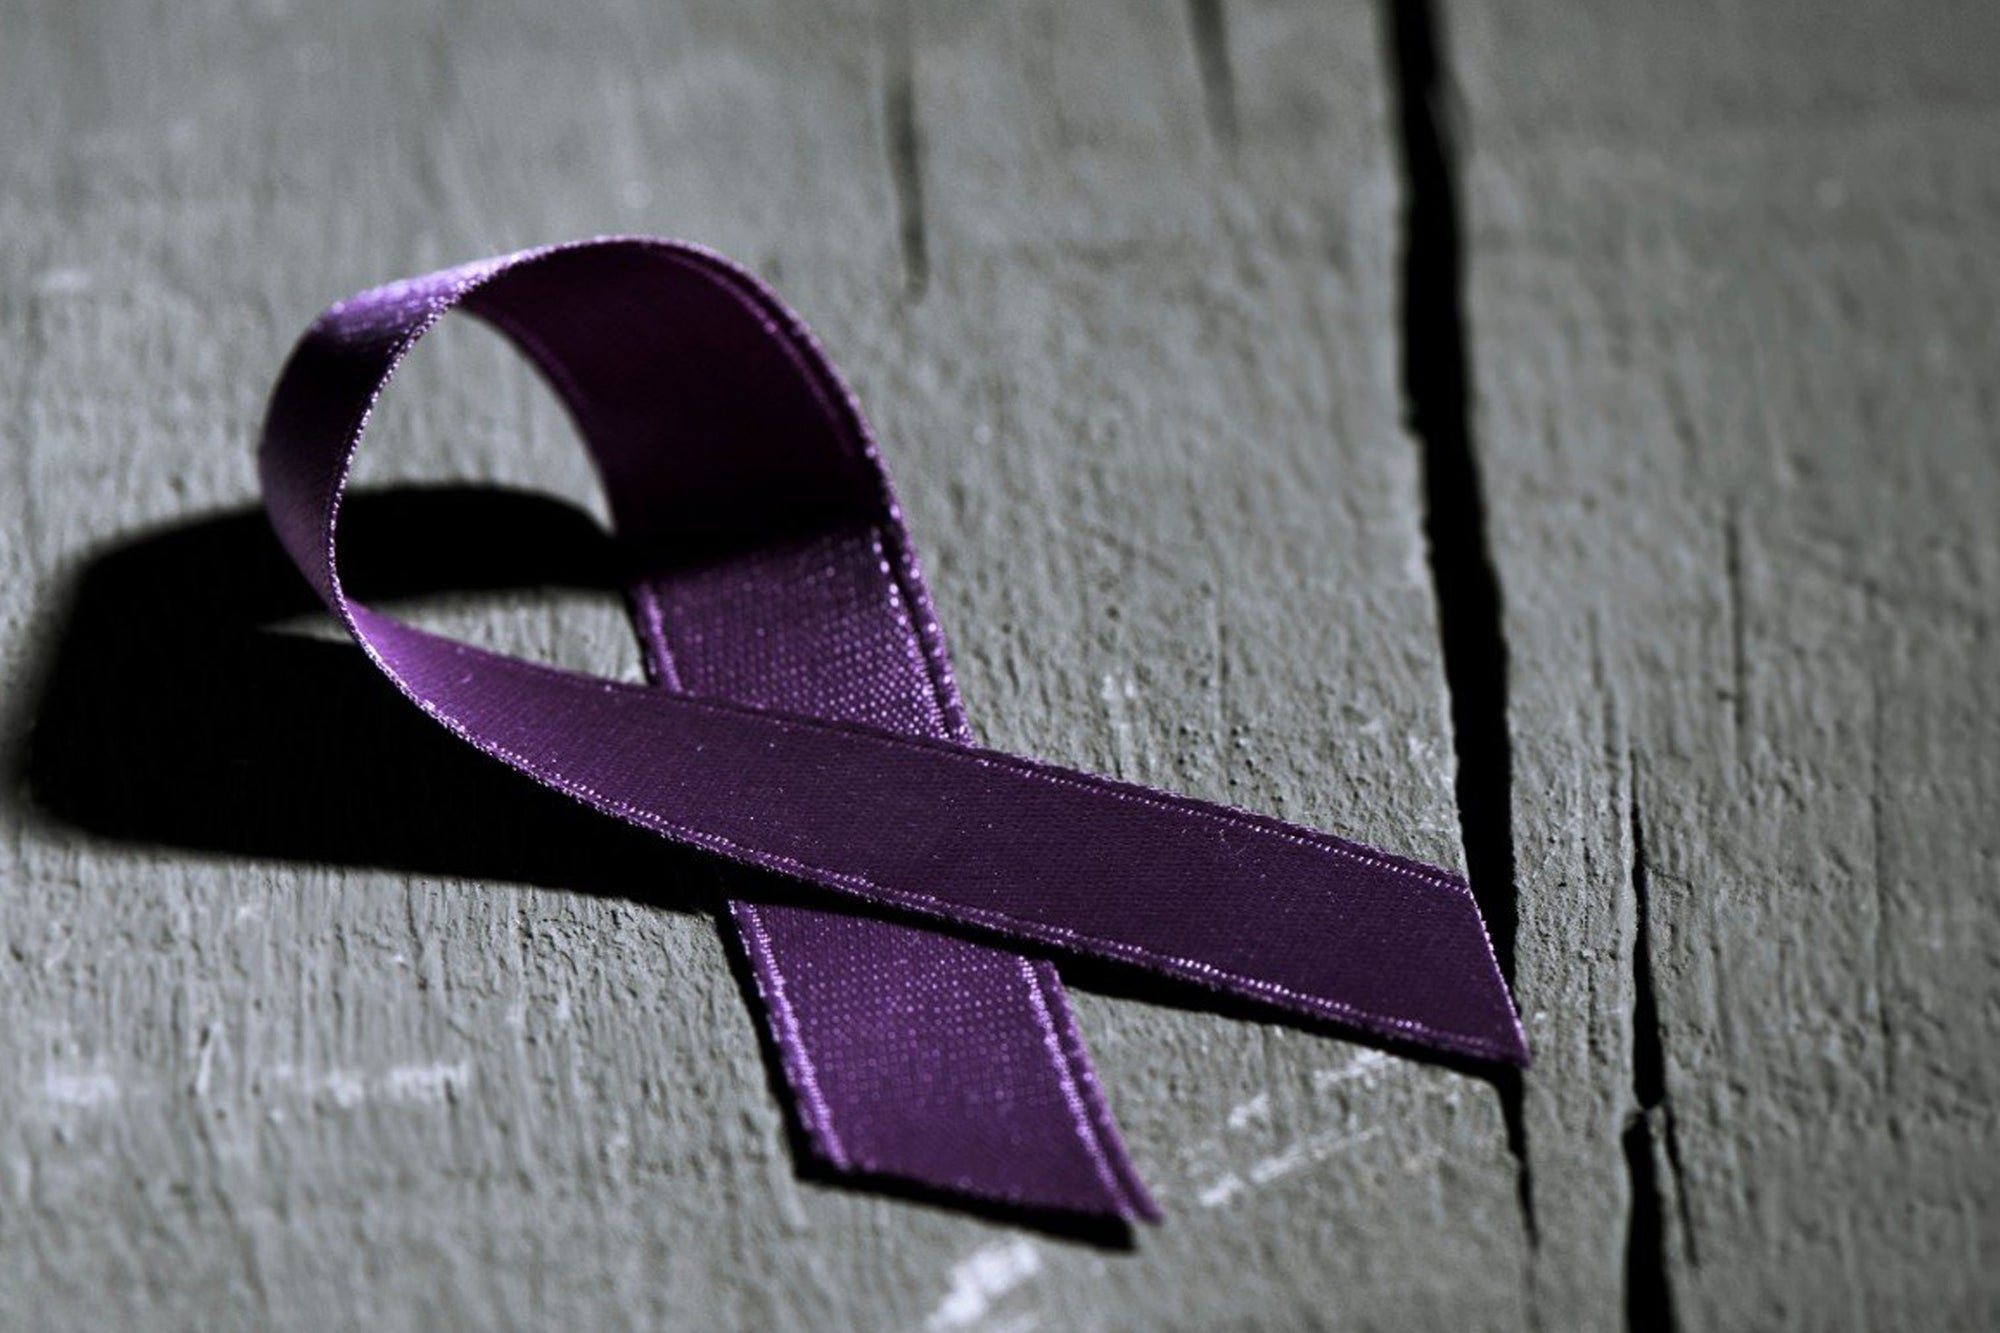 October is Domestic Violence month and here is my story...